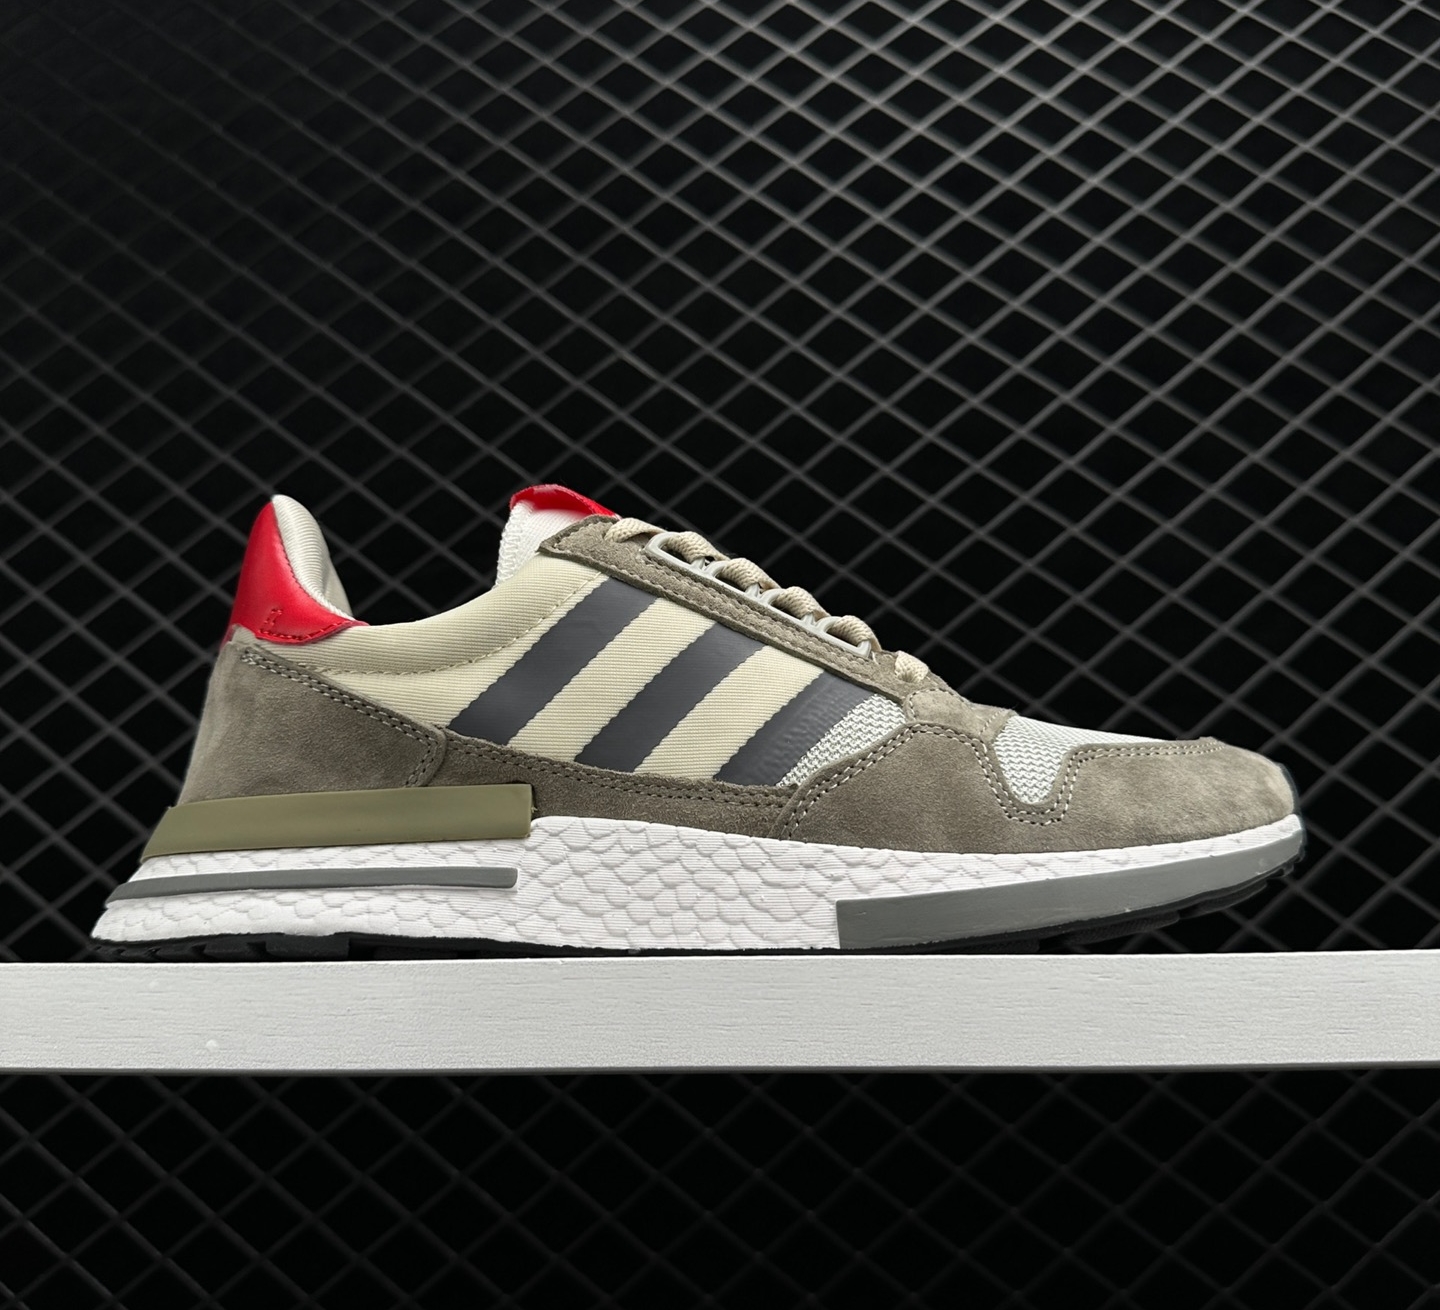 Adidas ZX 500 Boost 'Grey' B42204 | Shop the Latest Adidas Sneakers